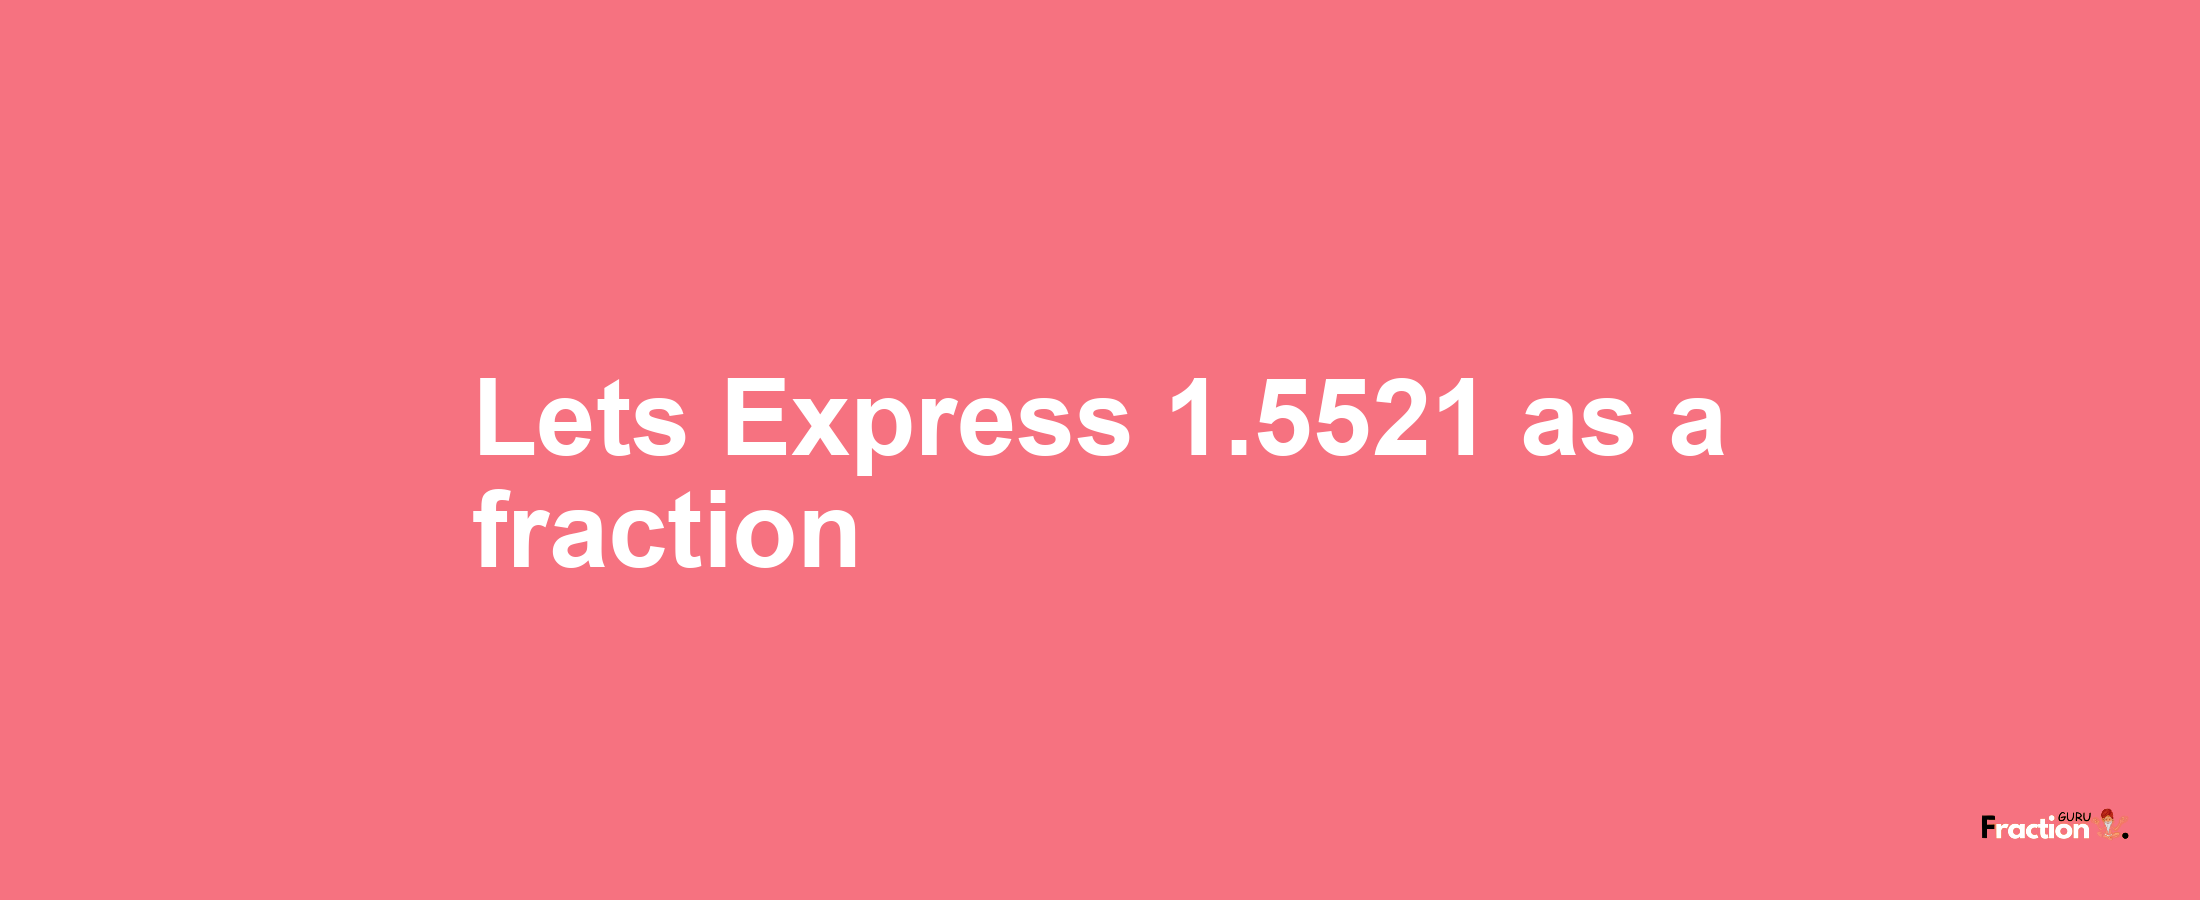 Lets Express 1.5521 as afraction